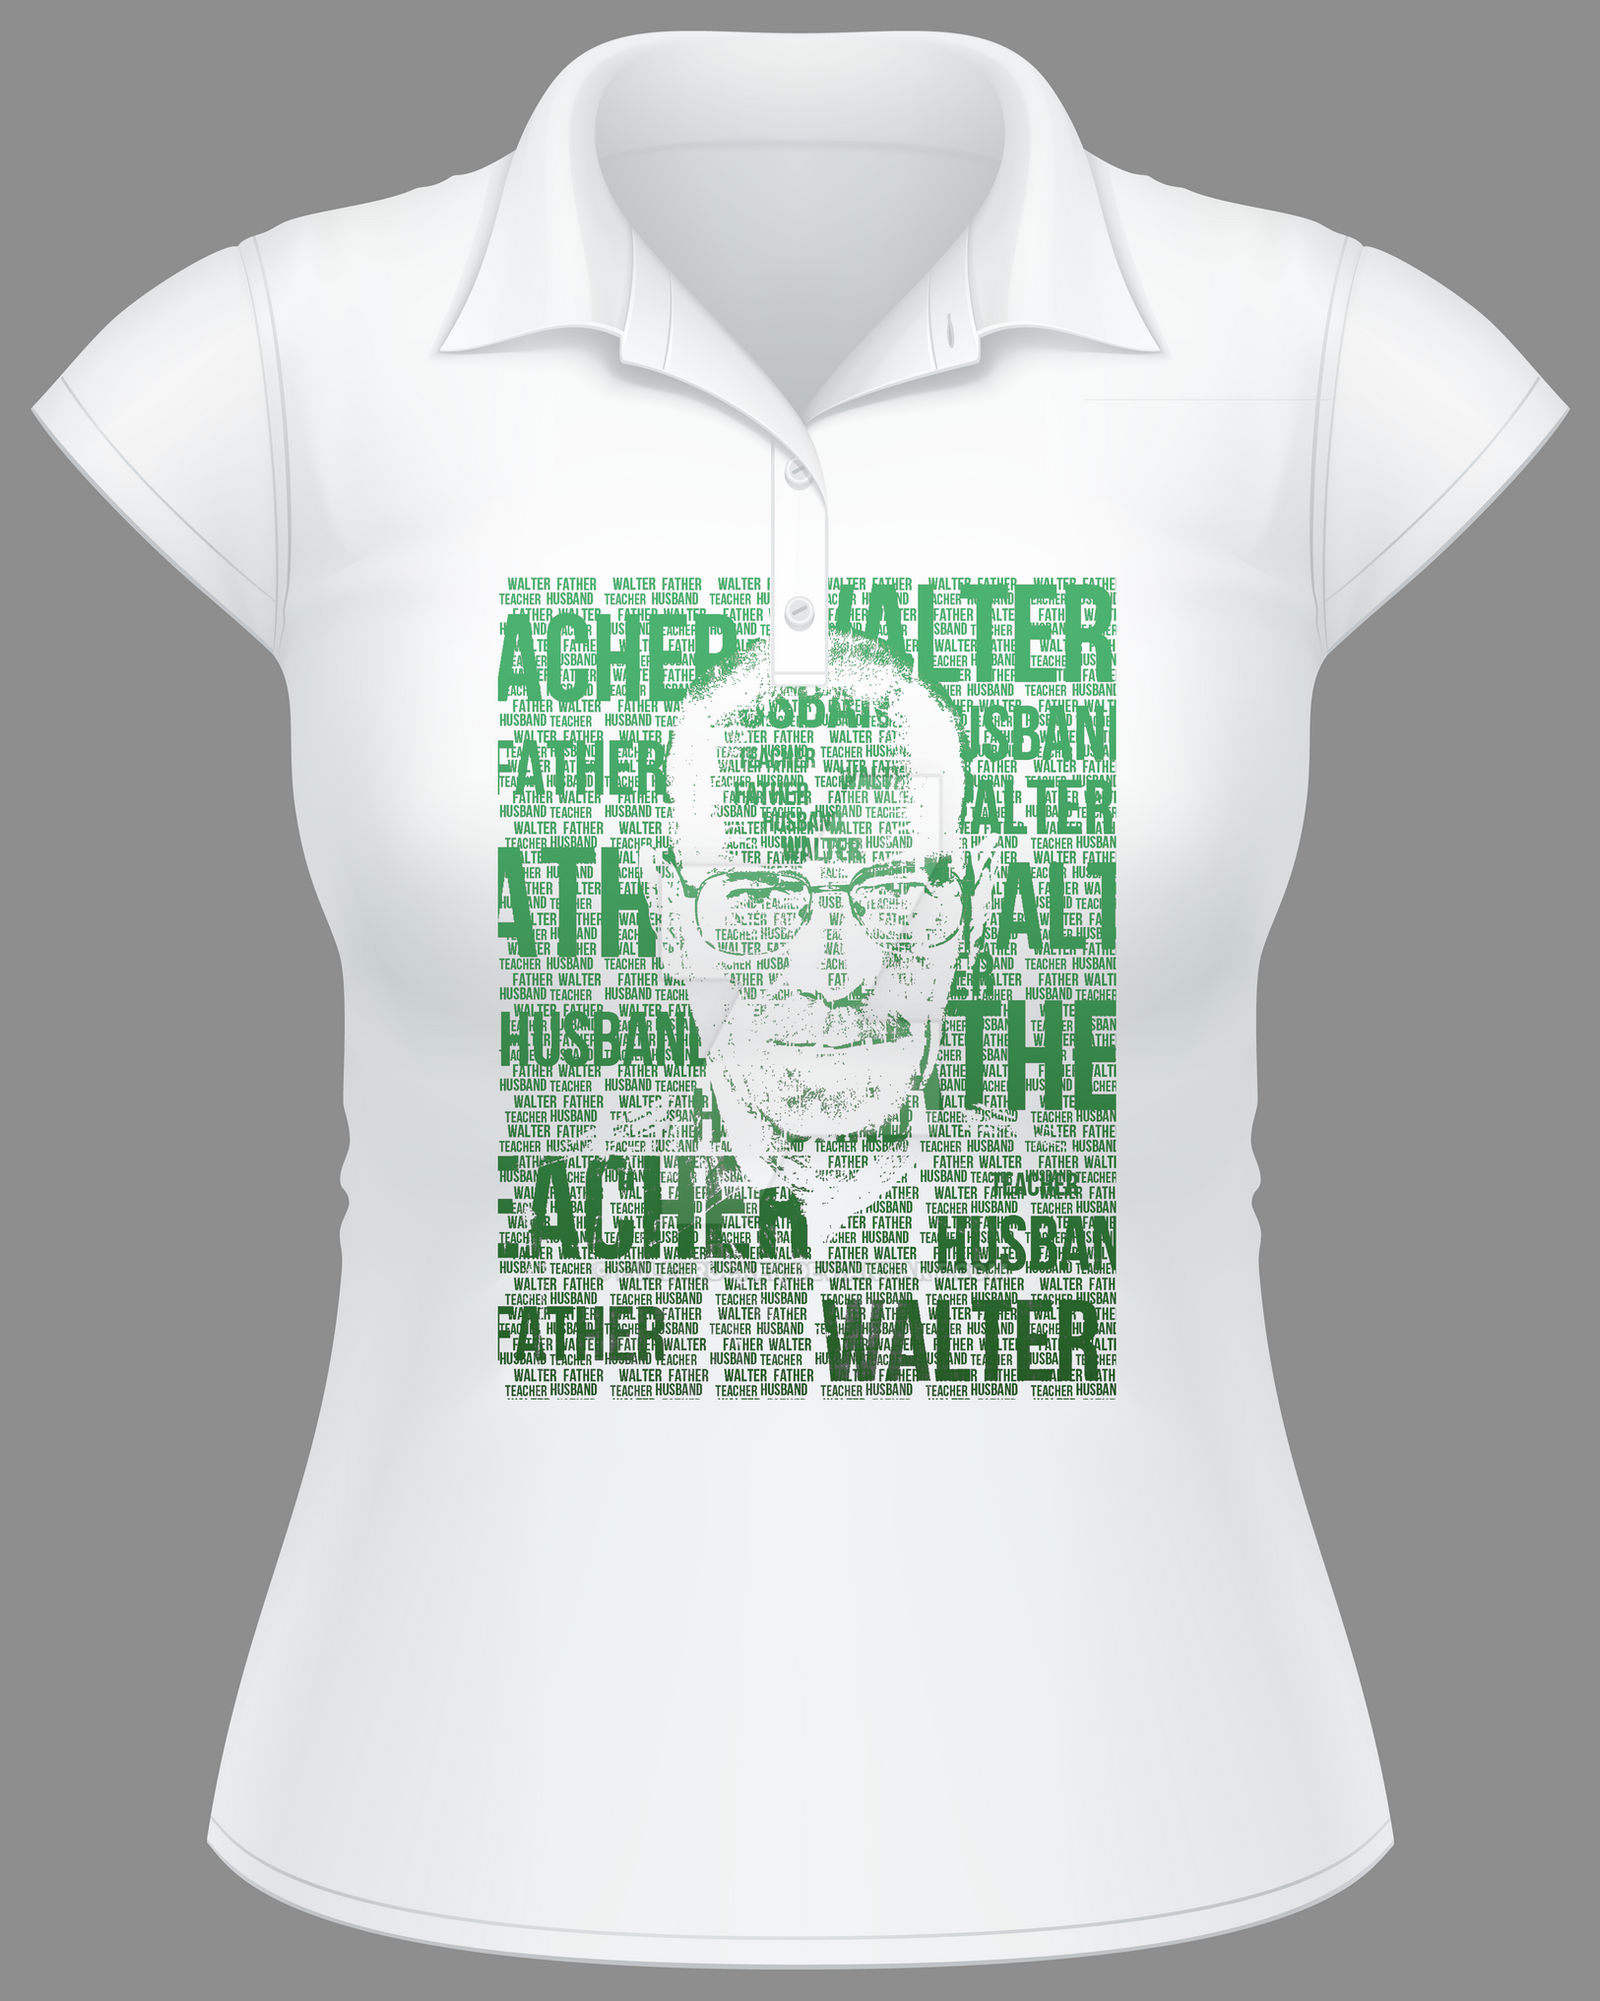 Breaking Bad Shirt - Father, Husband and Teacher by Fulesrucker on  DeviantArt